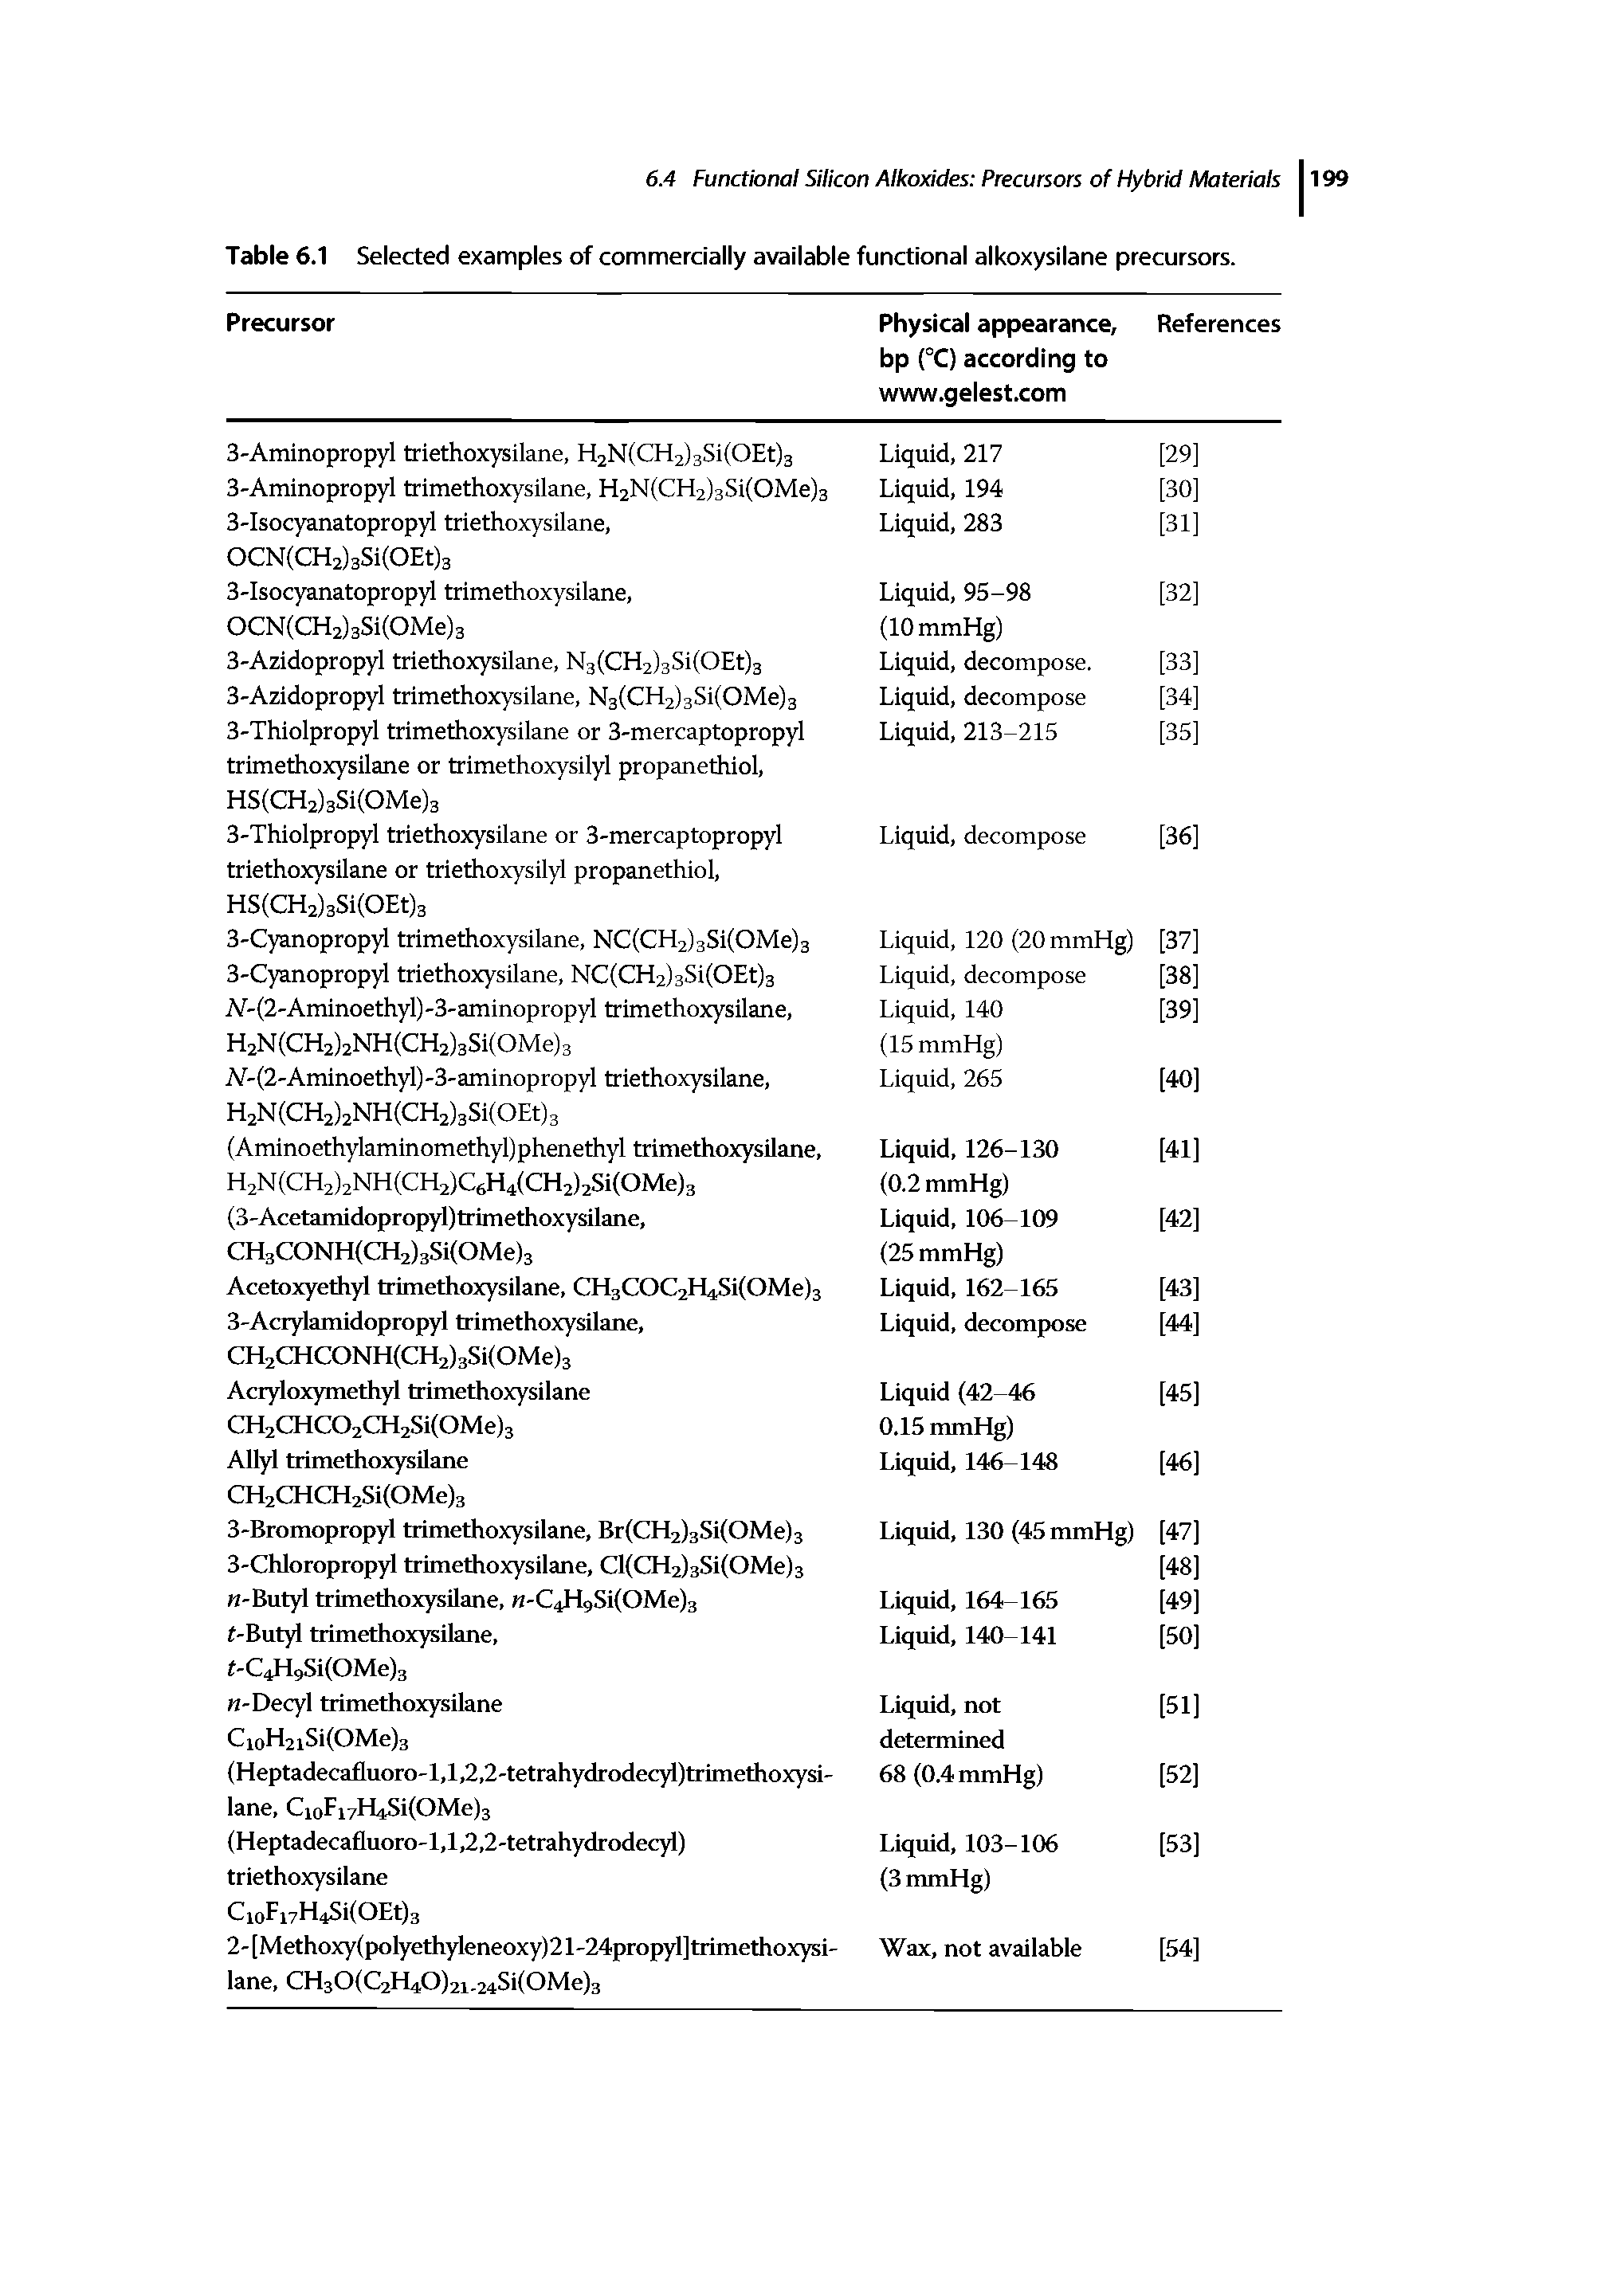 Table 6.1 Selected examples of commercially available functional alkoxysilane precursors.